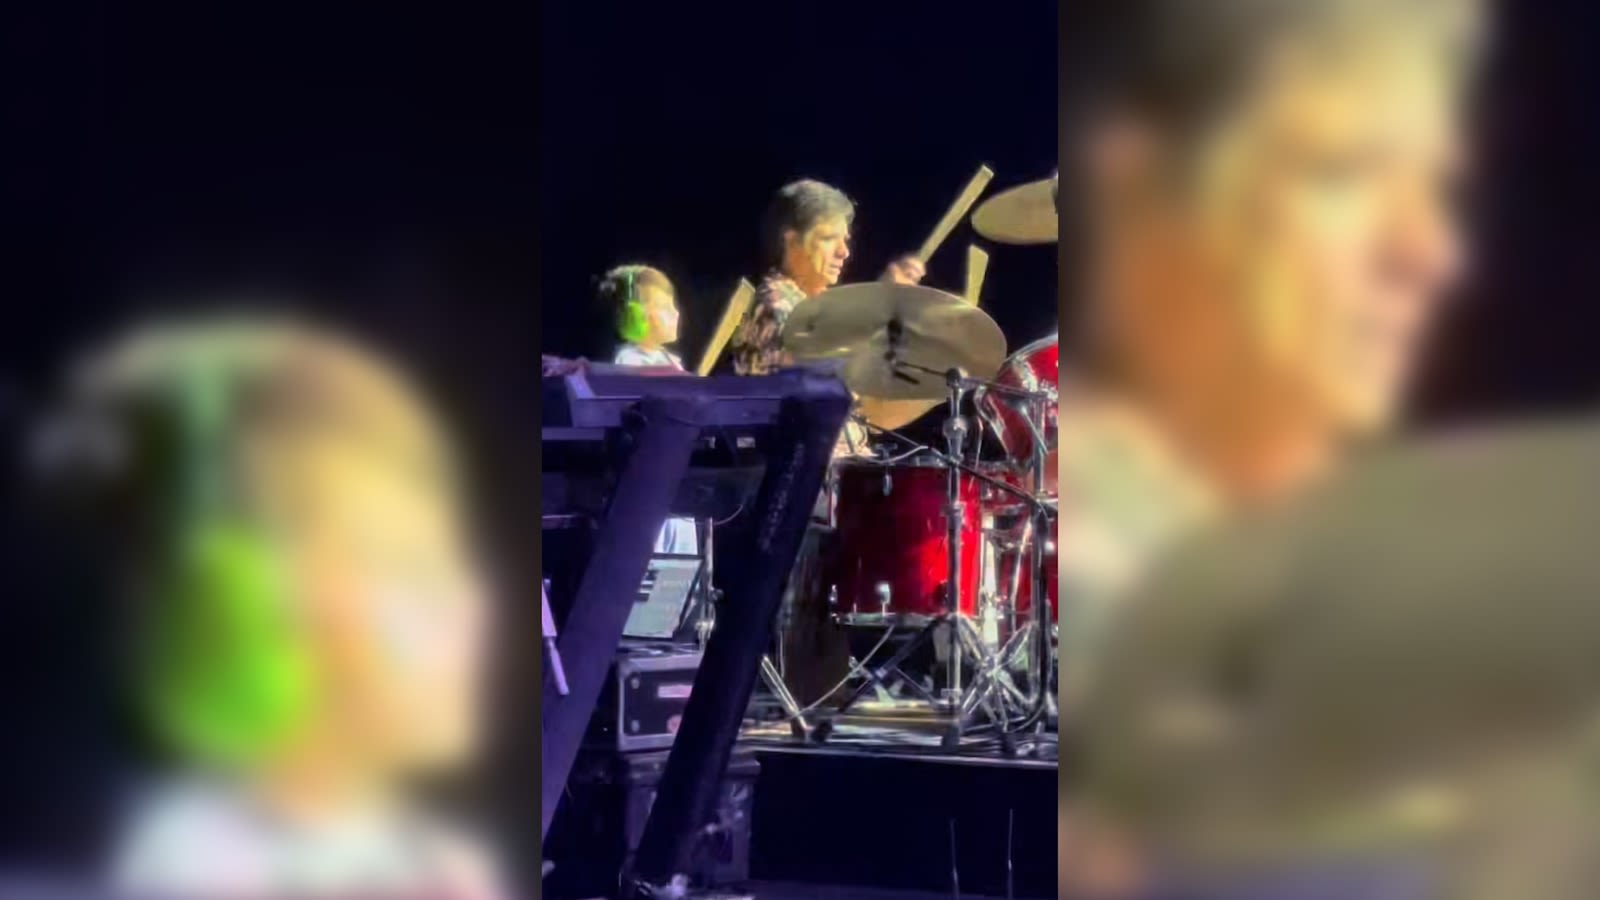 See John Stamos' 6-year-old son Billy play drums during The Beach Boys concert